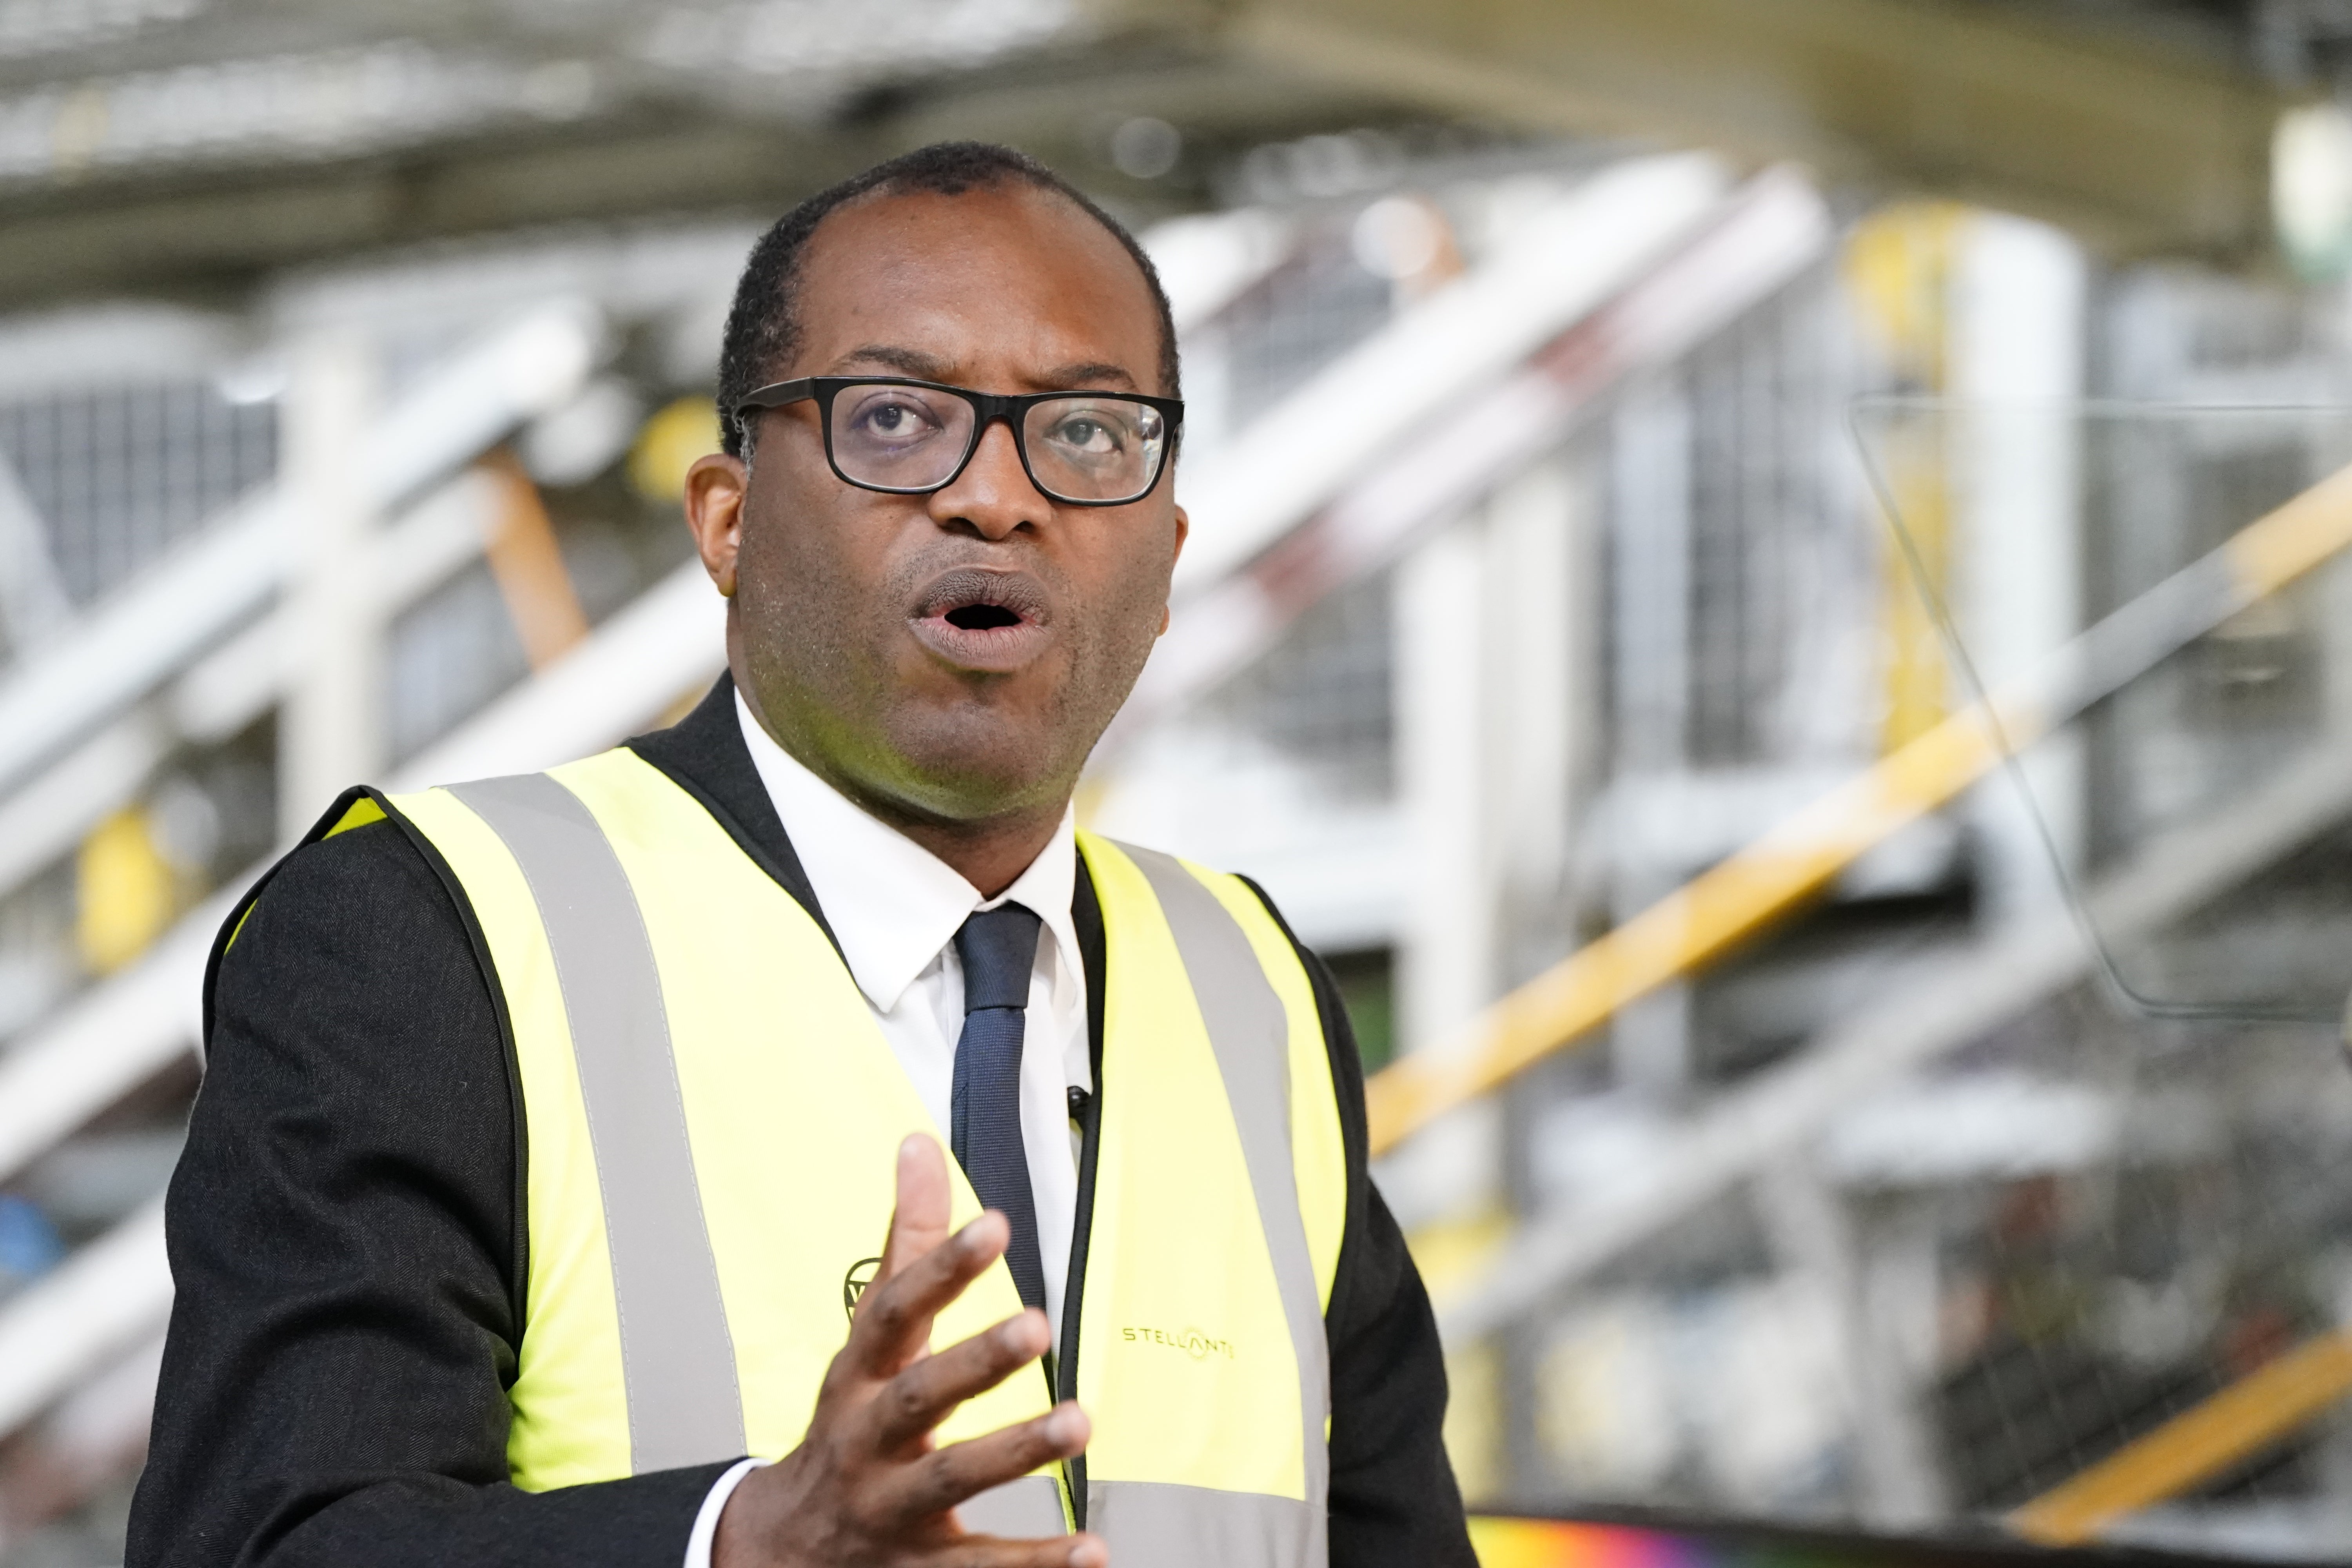 Kwasi Kwarteng, the business secretary, is ‘monitoring this situation closely’